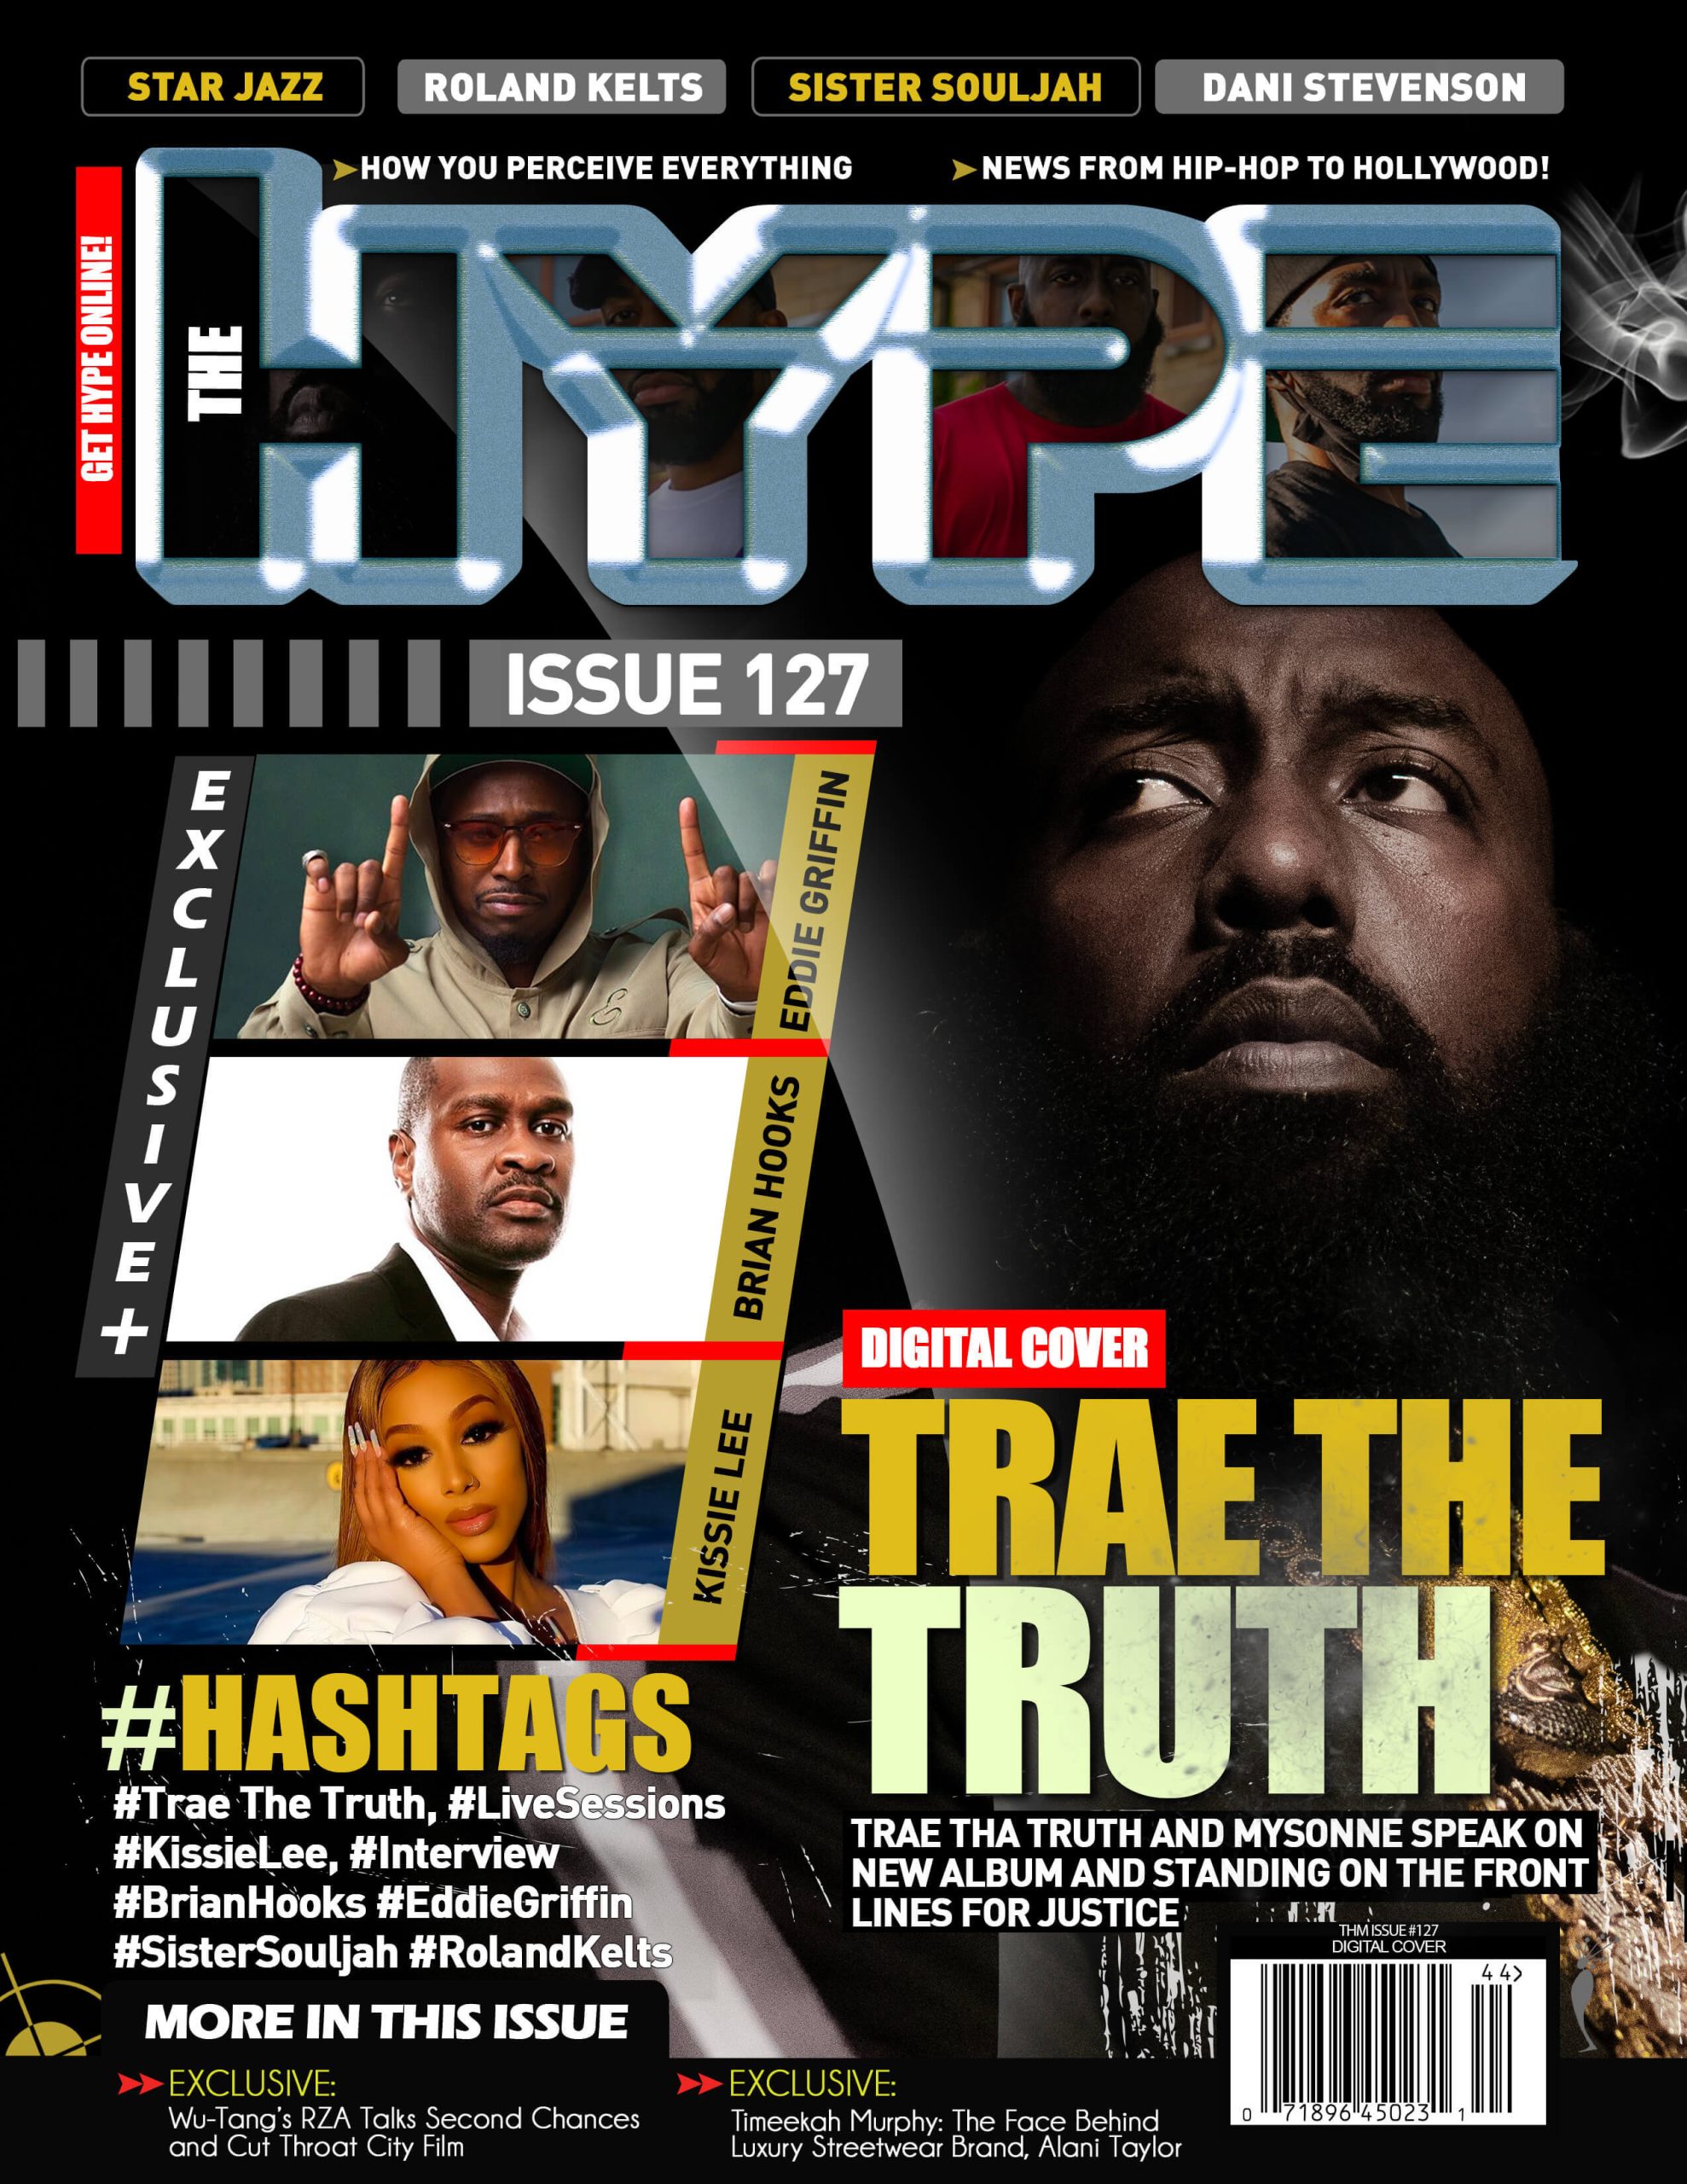 Issue #127 – Digital Cover